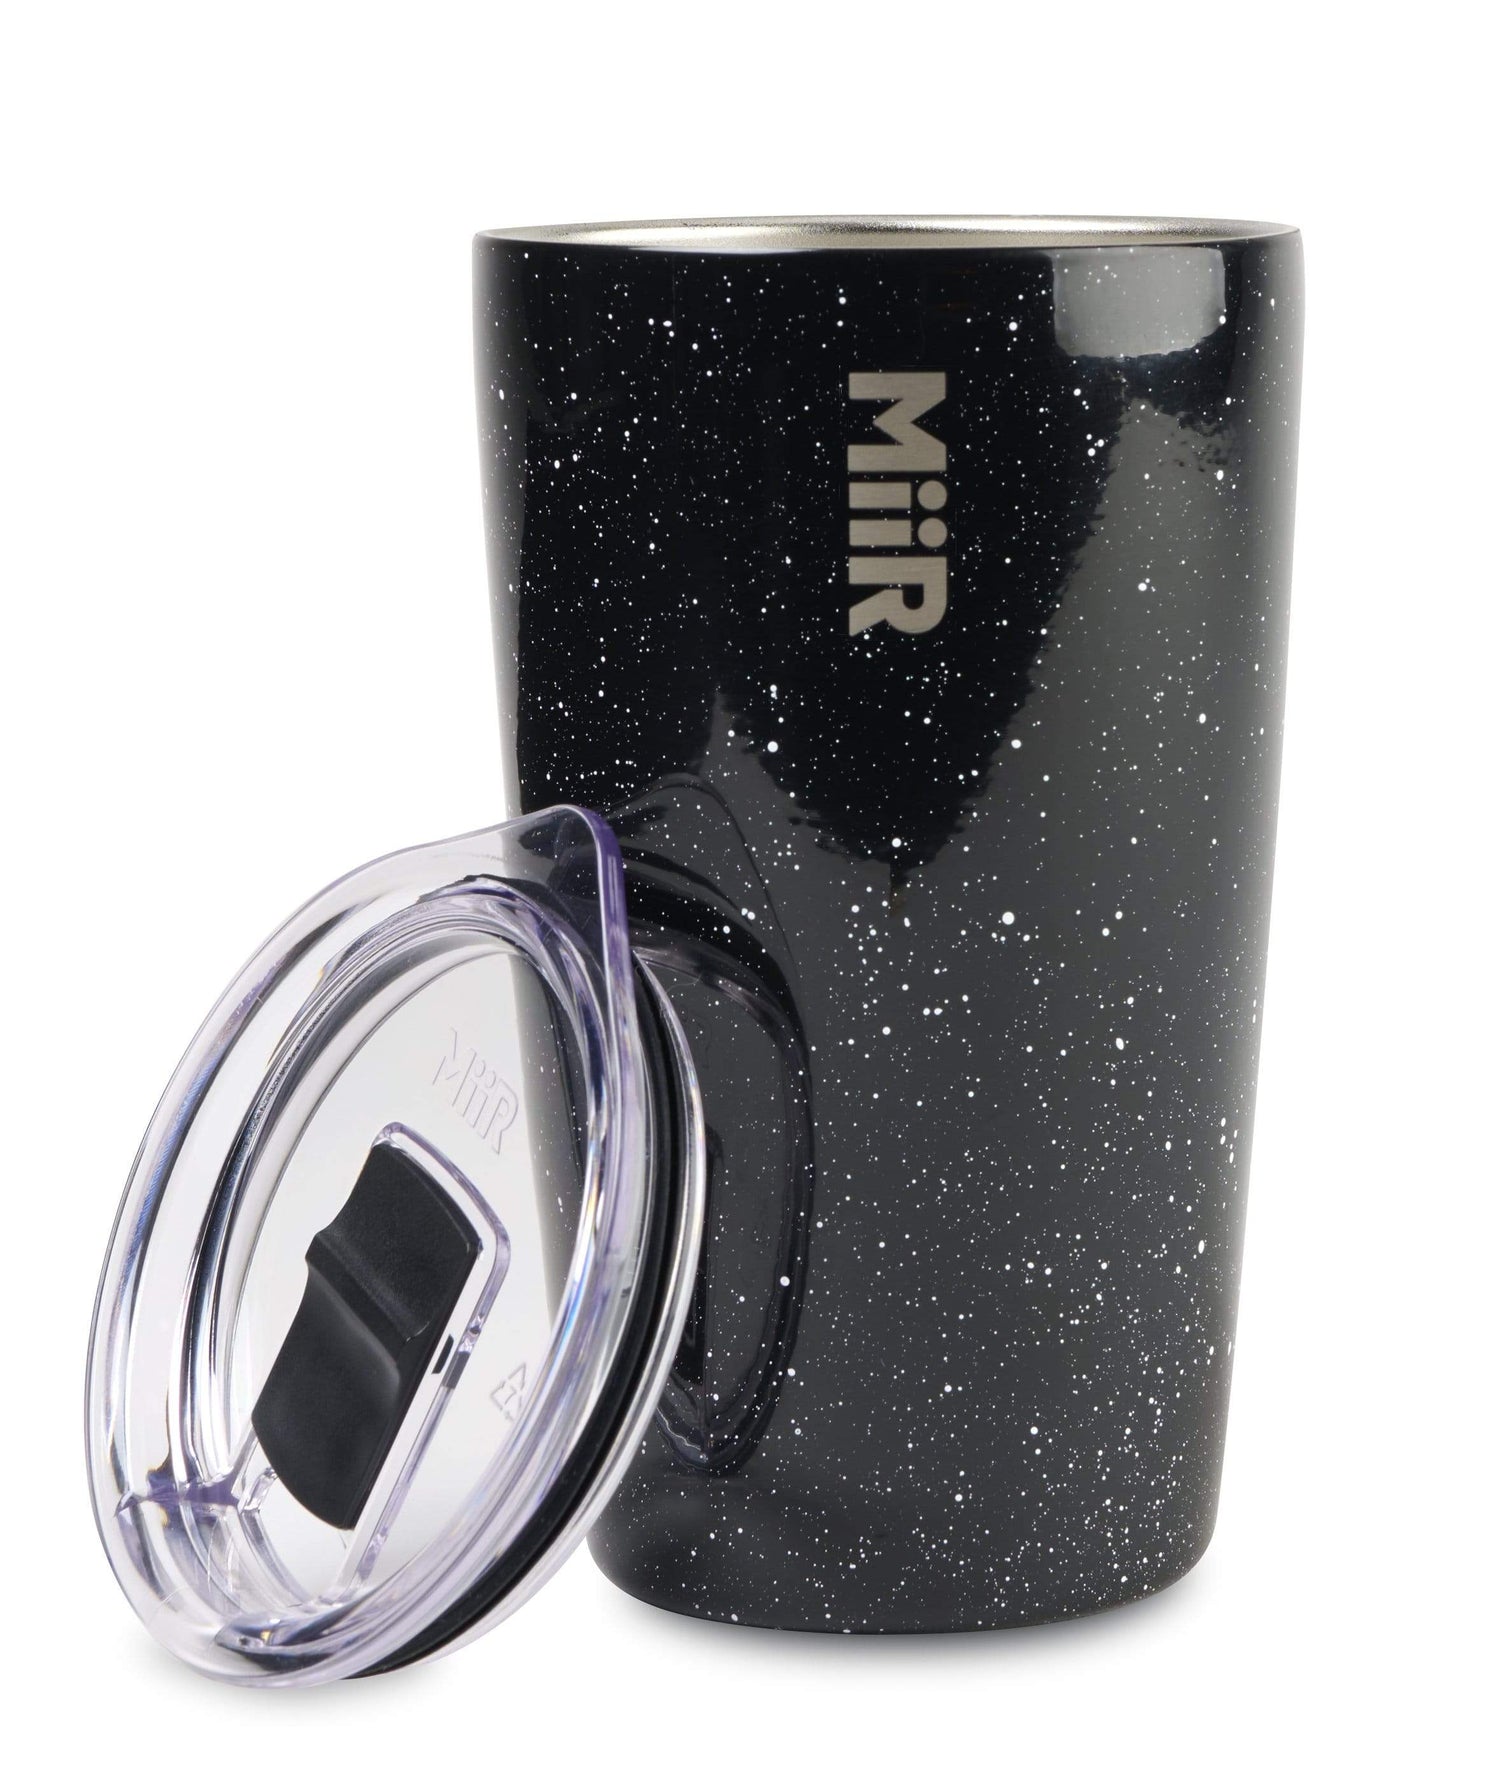 MiiR Insulated Tumbler with Press-On Lid, Black, 8oz